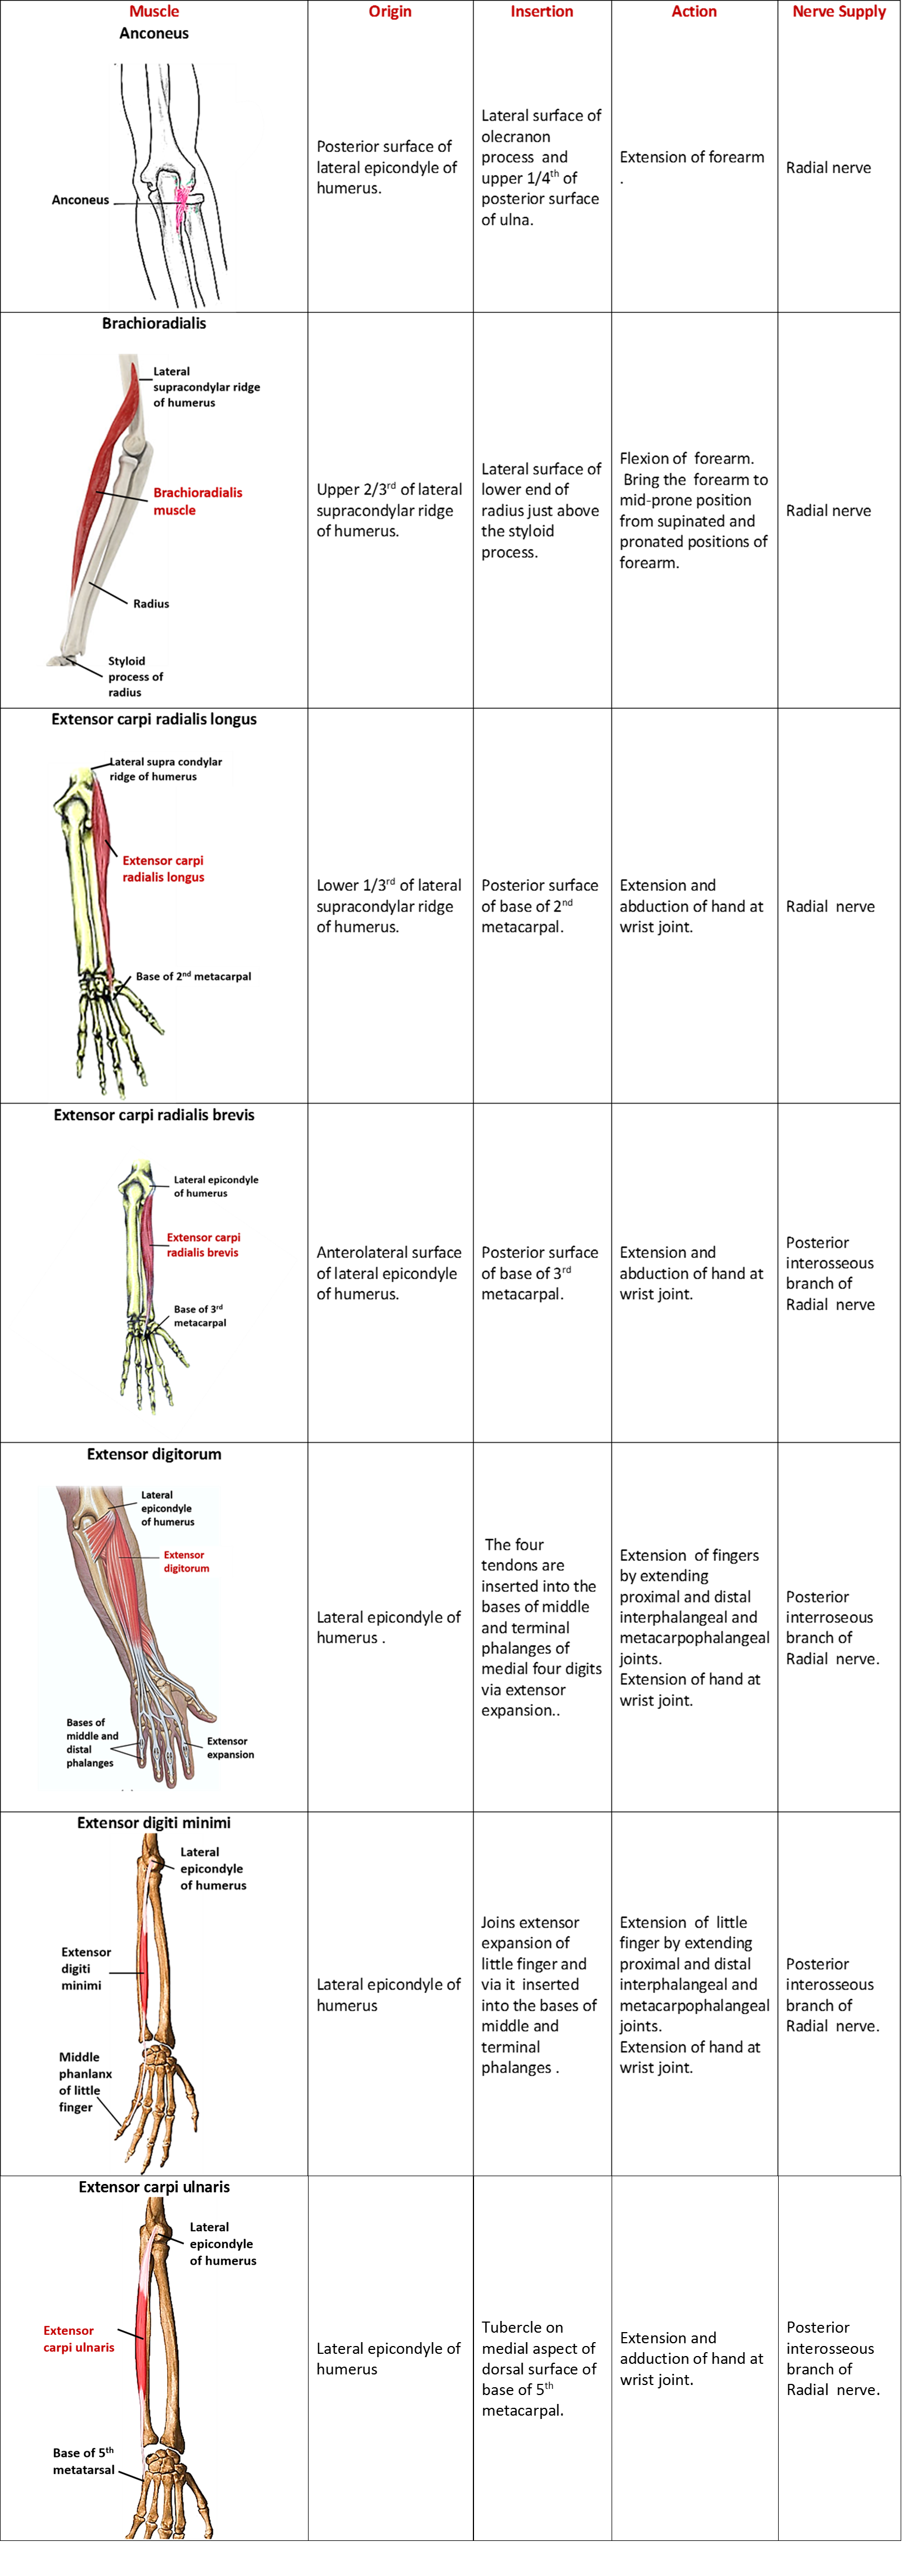 superficial extensor muscles of forearm